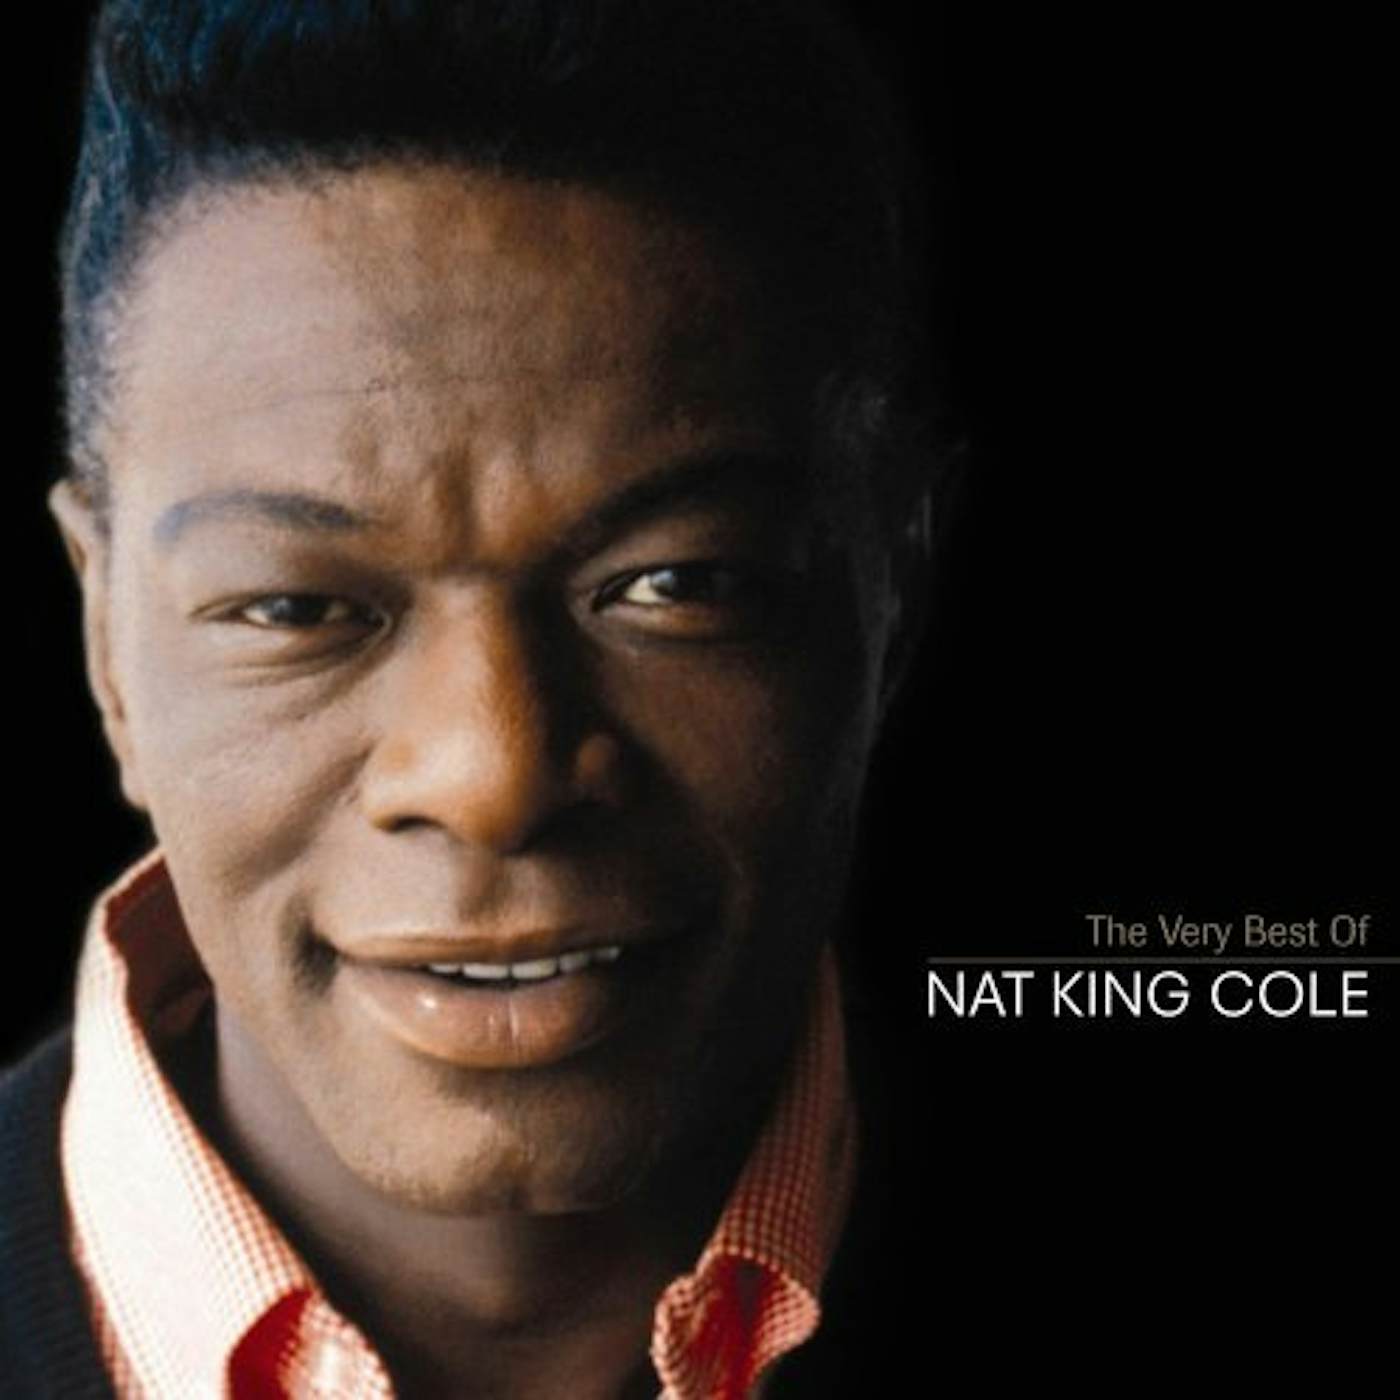 VERY BEST OF NAT KING COLE CD